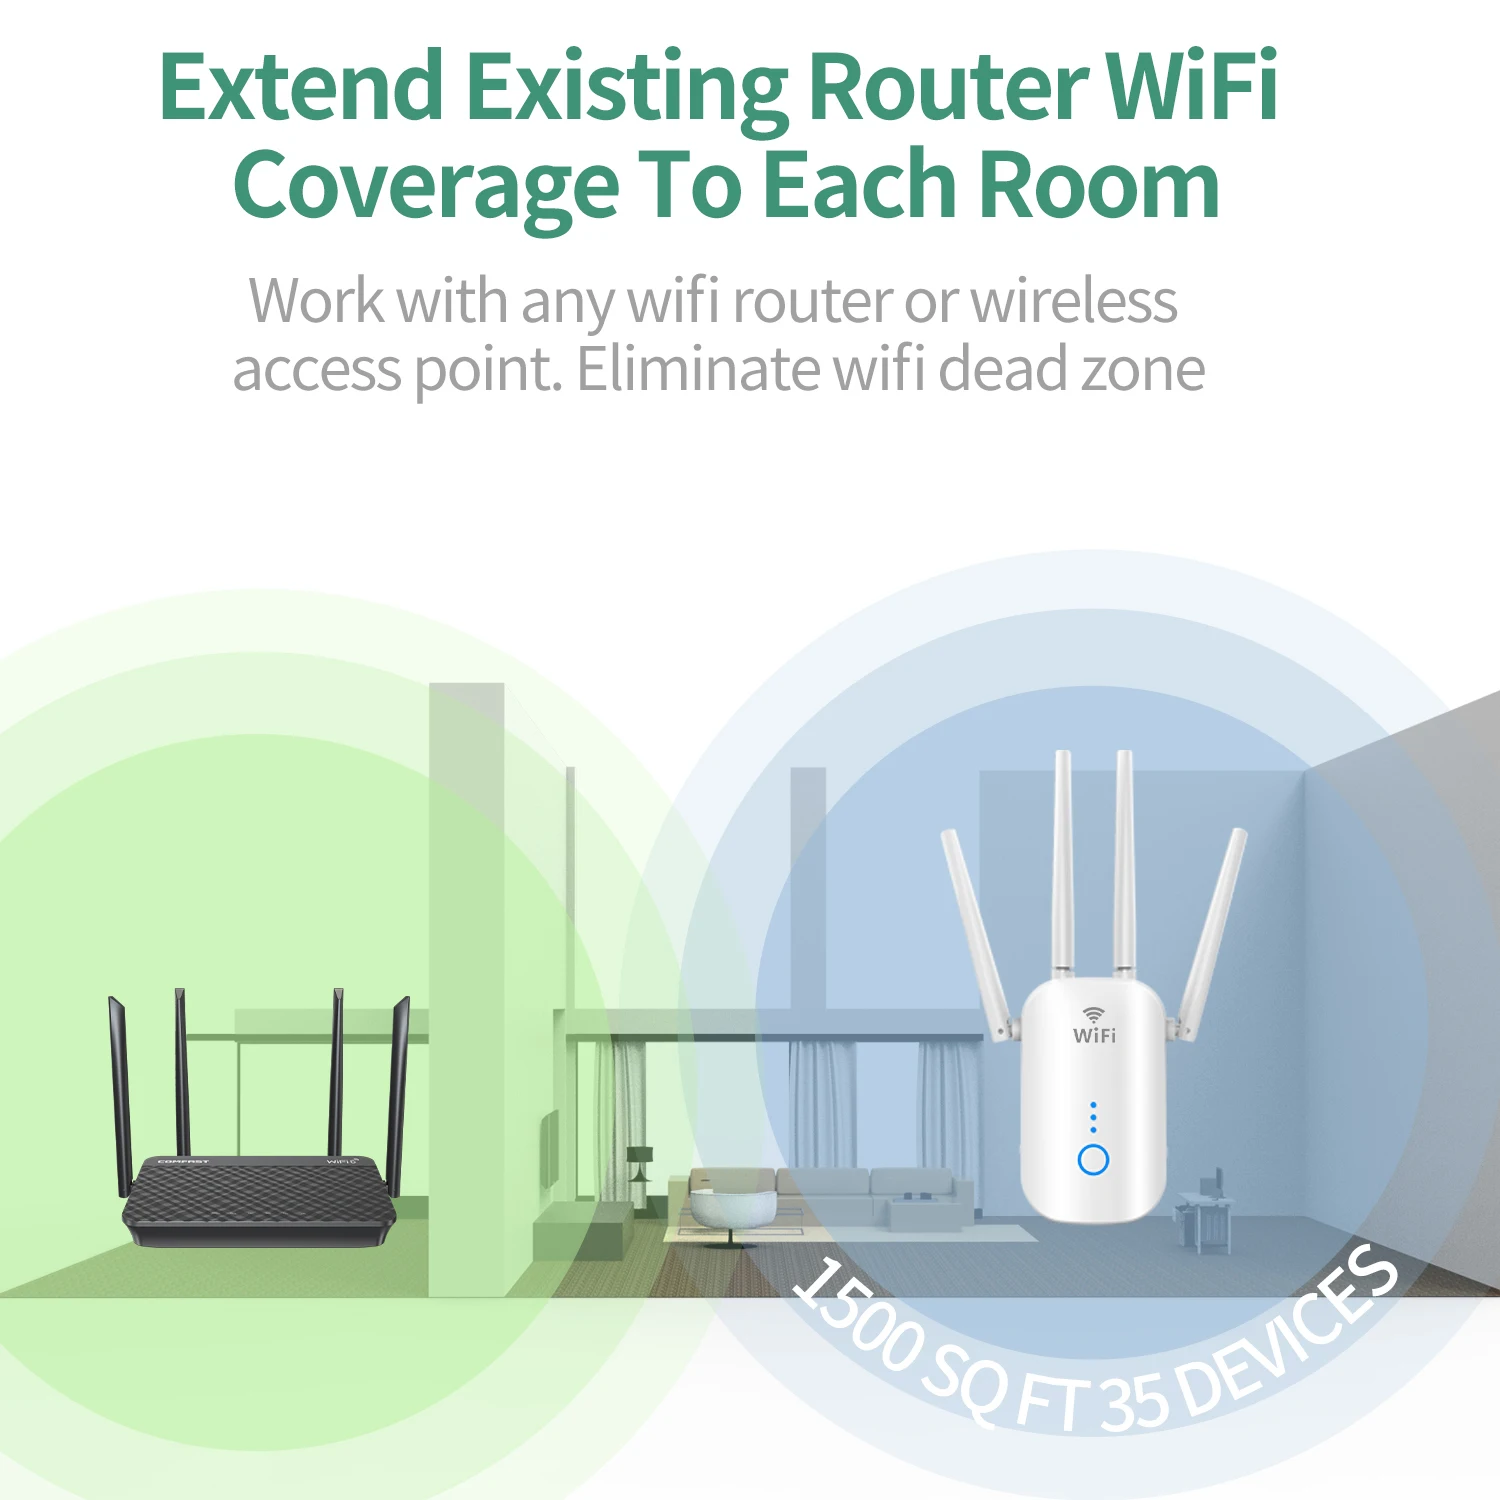 WiFi 6 Extender 1800Mbps/WiFi 5 1200Mbps Extender Dual Band 2.4G&5.8G Wireless Repeater WiFi Range Booster AP/Router 4 Antennas images - 6